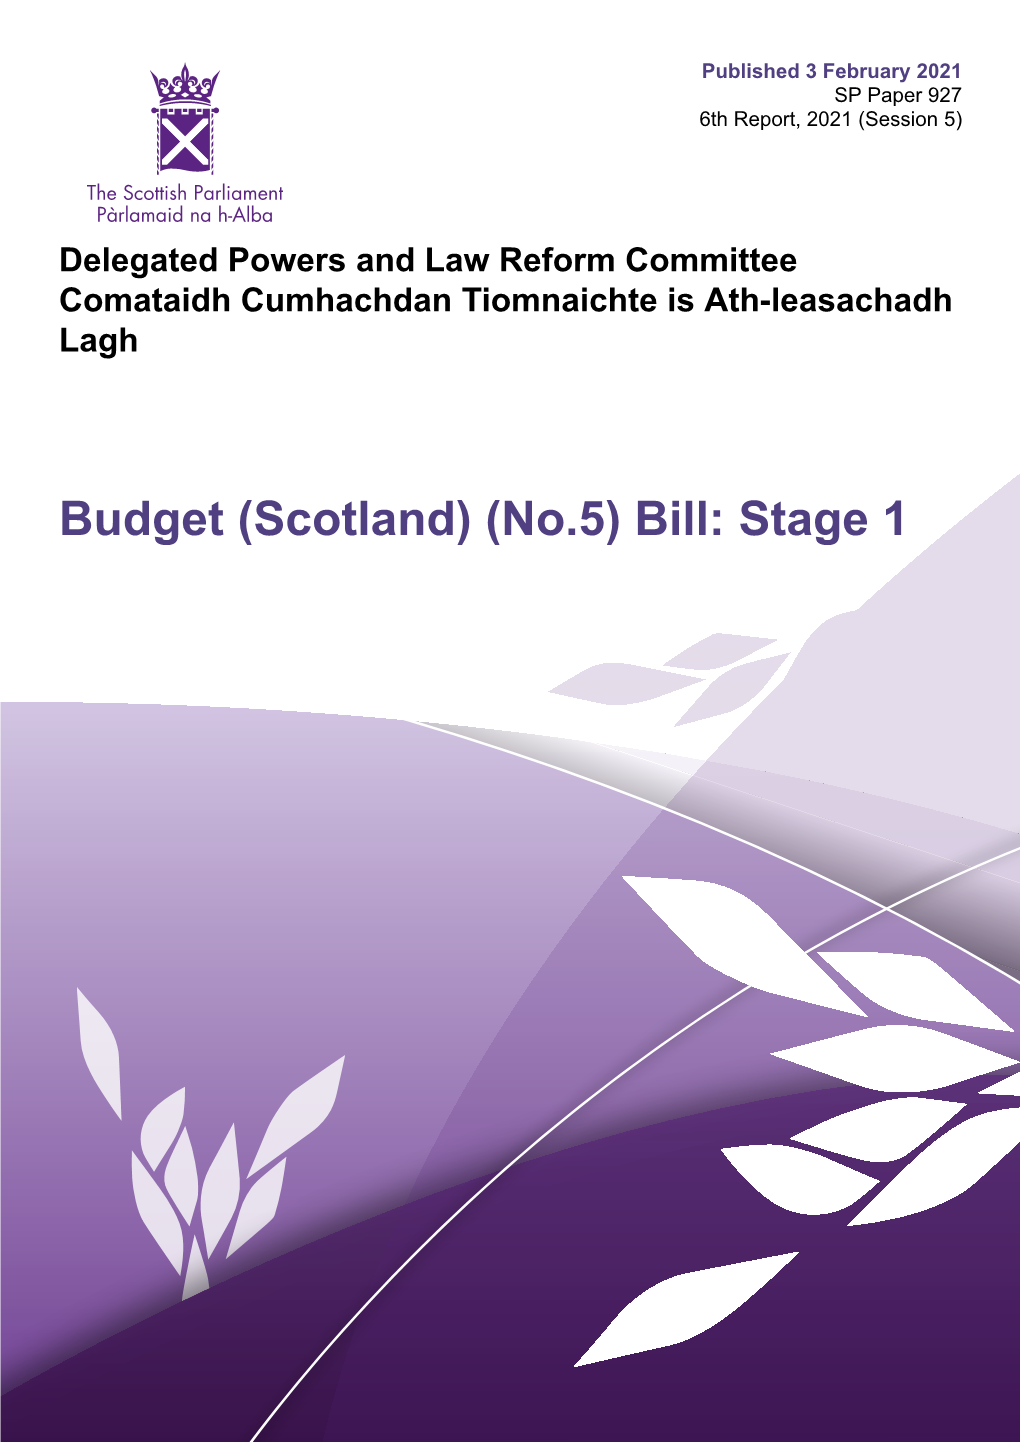 Budget (Scotland) (No.5) Bill: Stage 1 Published in Scotland by the Scottish Parliamentary Corporate Body